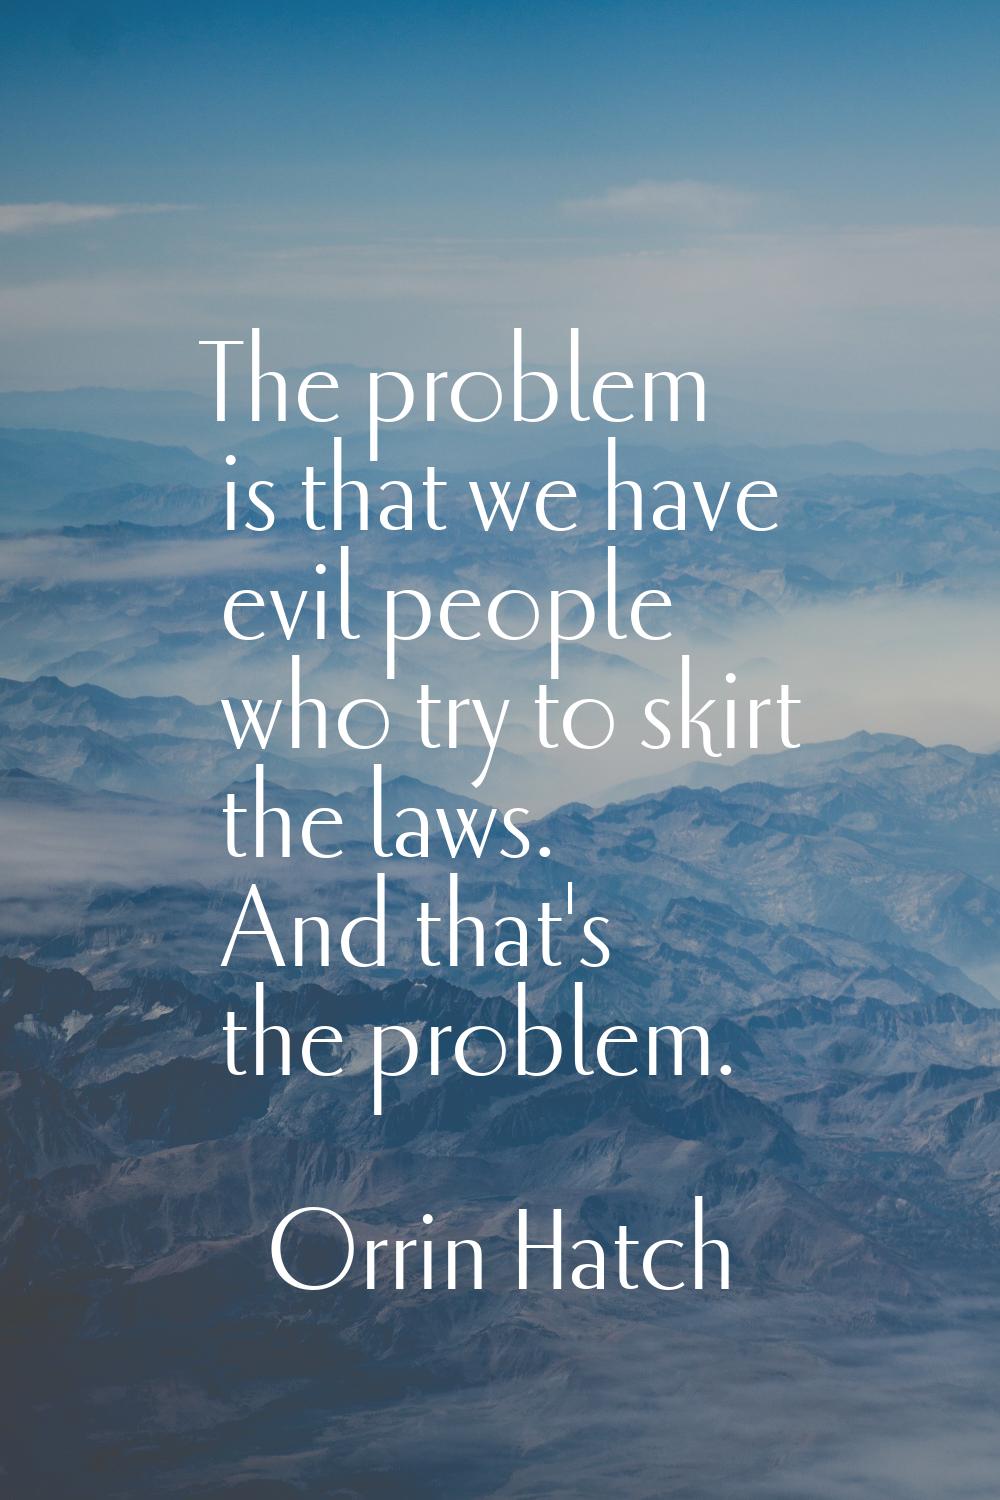 The problem is that we have evil people who try to skirt the laws. And that's the problem.